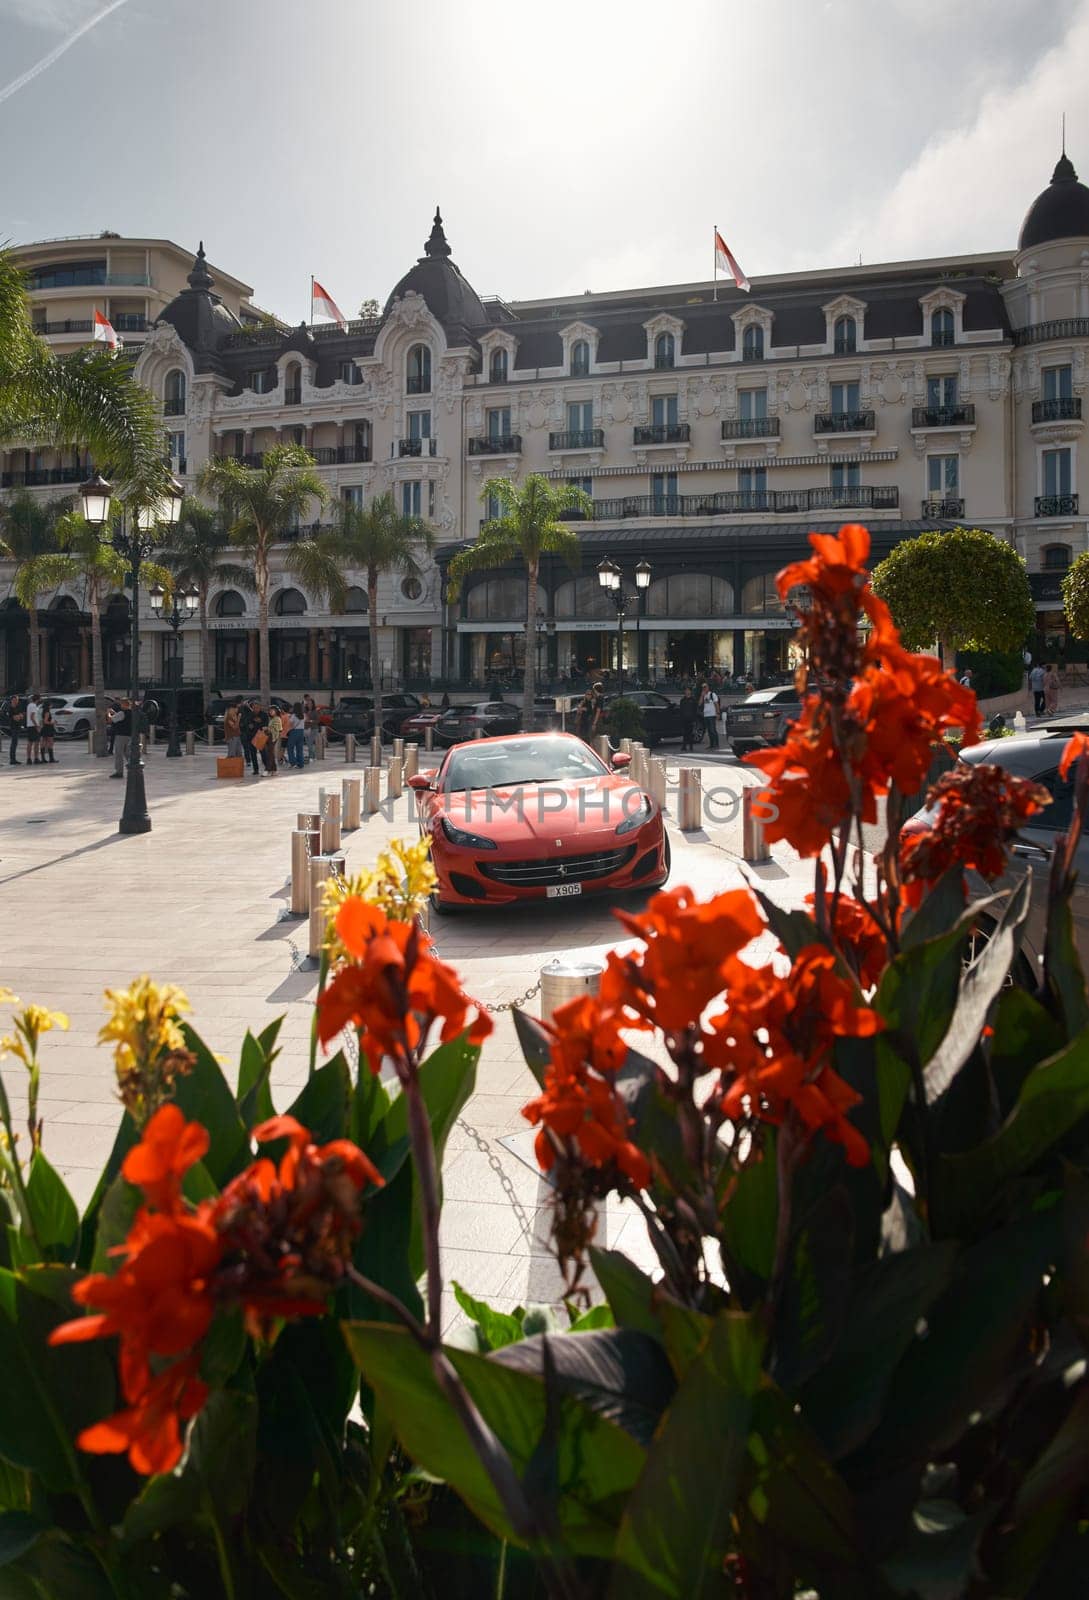 Monaco, Monte-Carlo, 22 October 2022: Square Casino Monte-Carlo at sunset, luxury cars, famous Hotel de Paris, wealth life, tourists take pictures of the landmark, pine trees, flowers. High quality photo